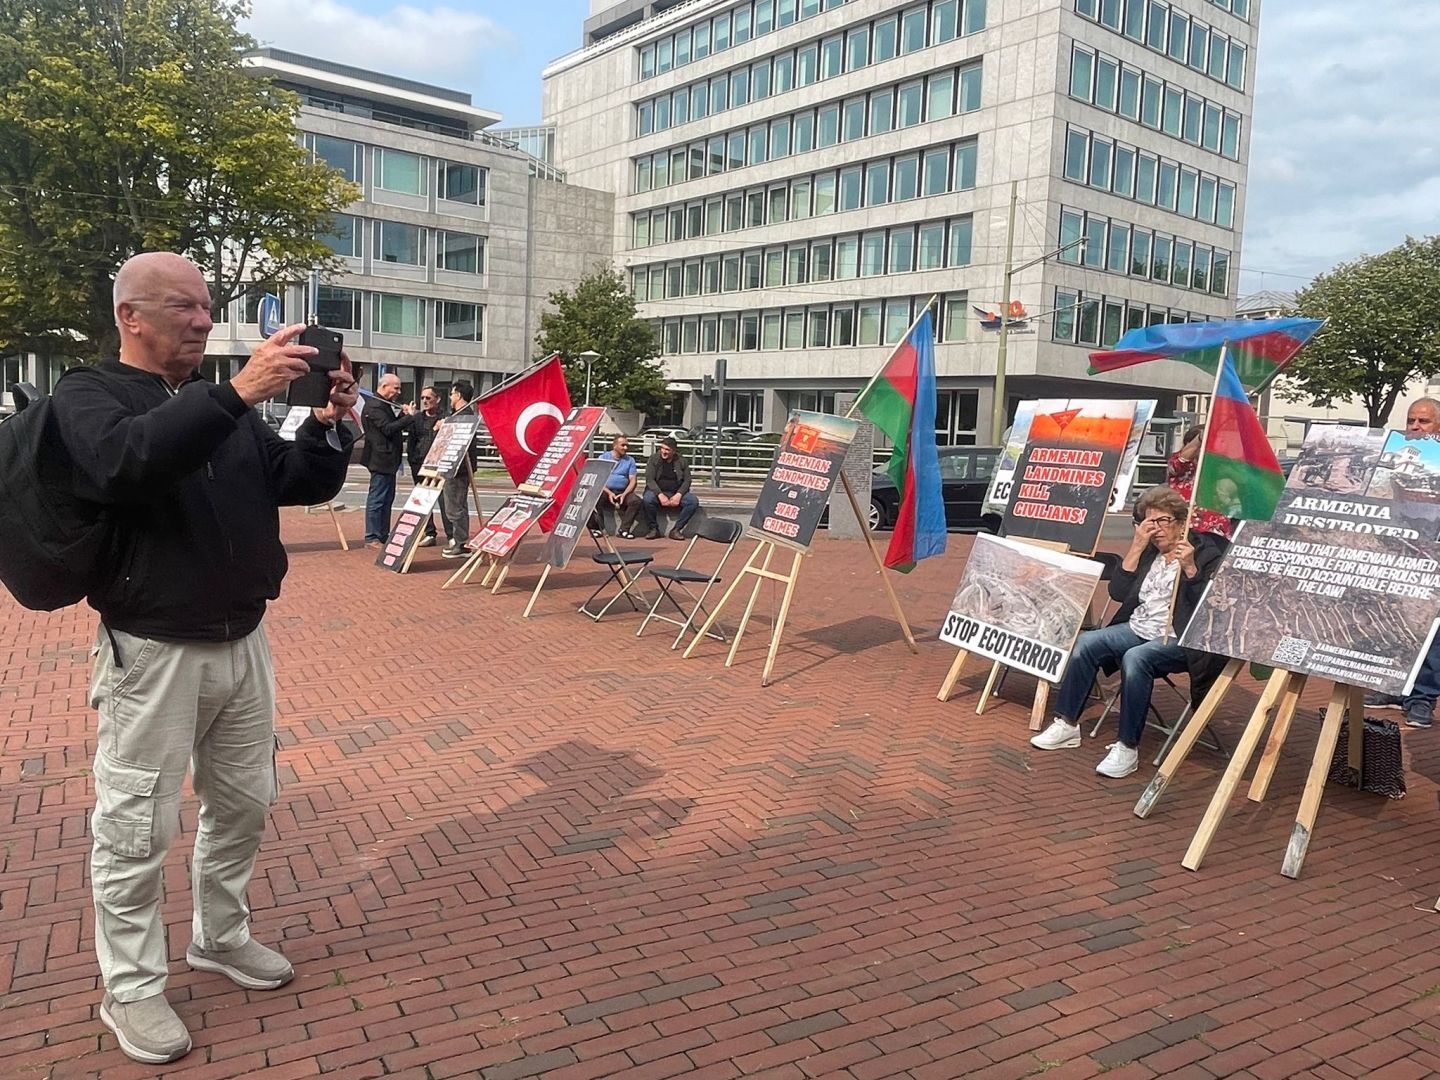 Azerbaijani community activists hold protest against Armenian military & environmental provocations in Hague